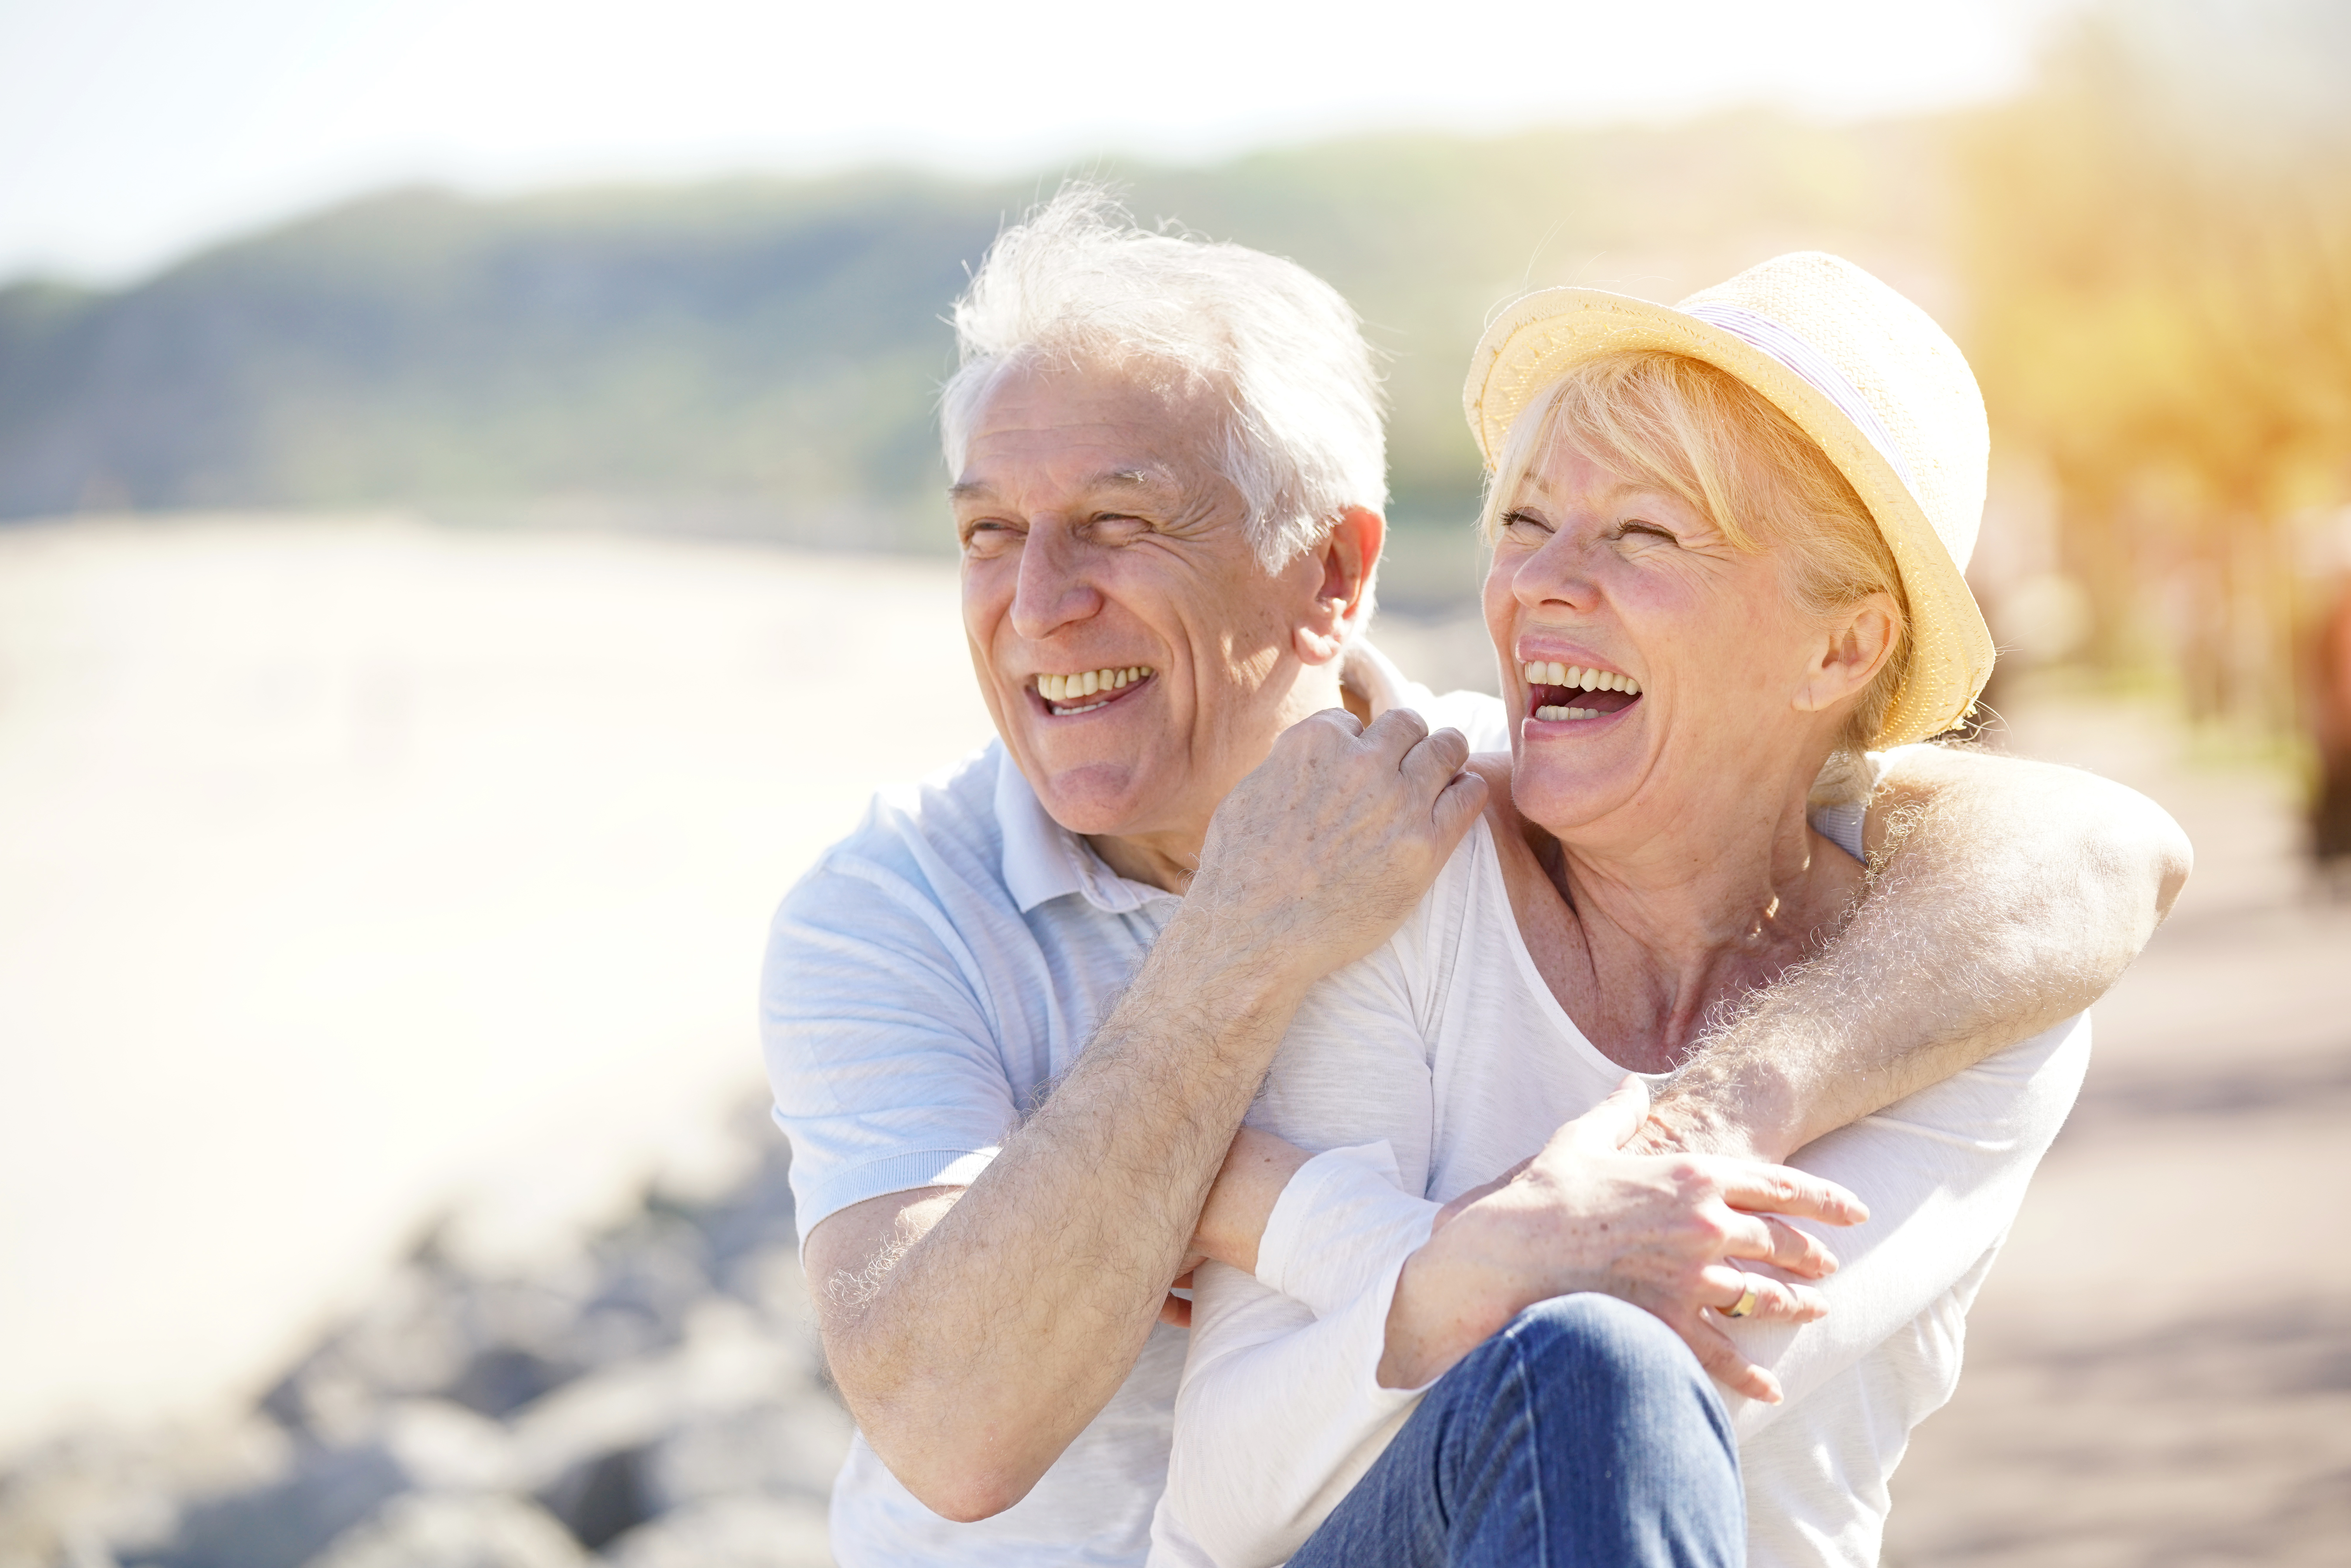 A senior couple relaxing by the sea on a sunny day | Source: Shutterstock